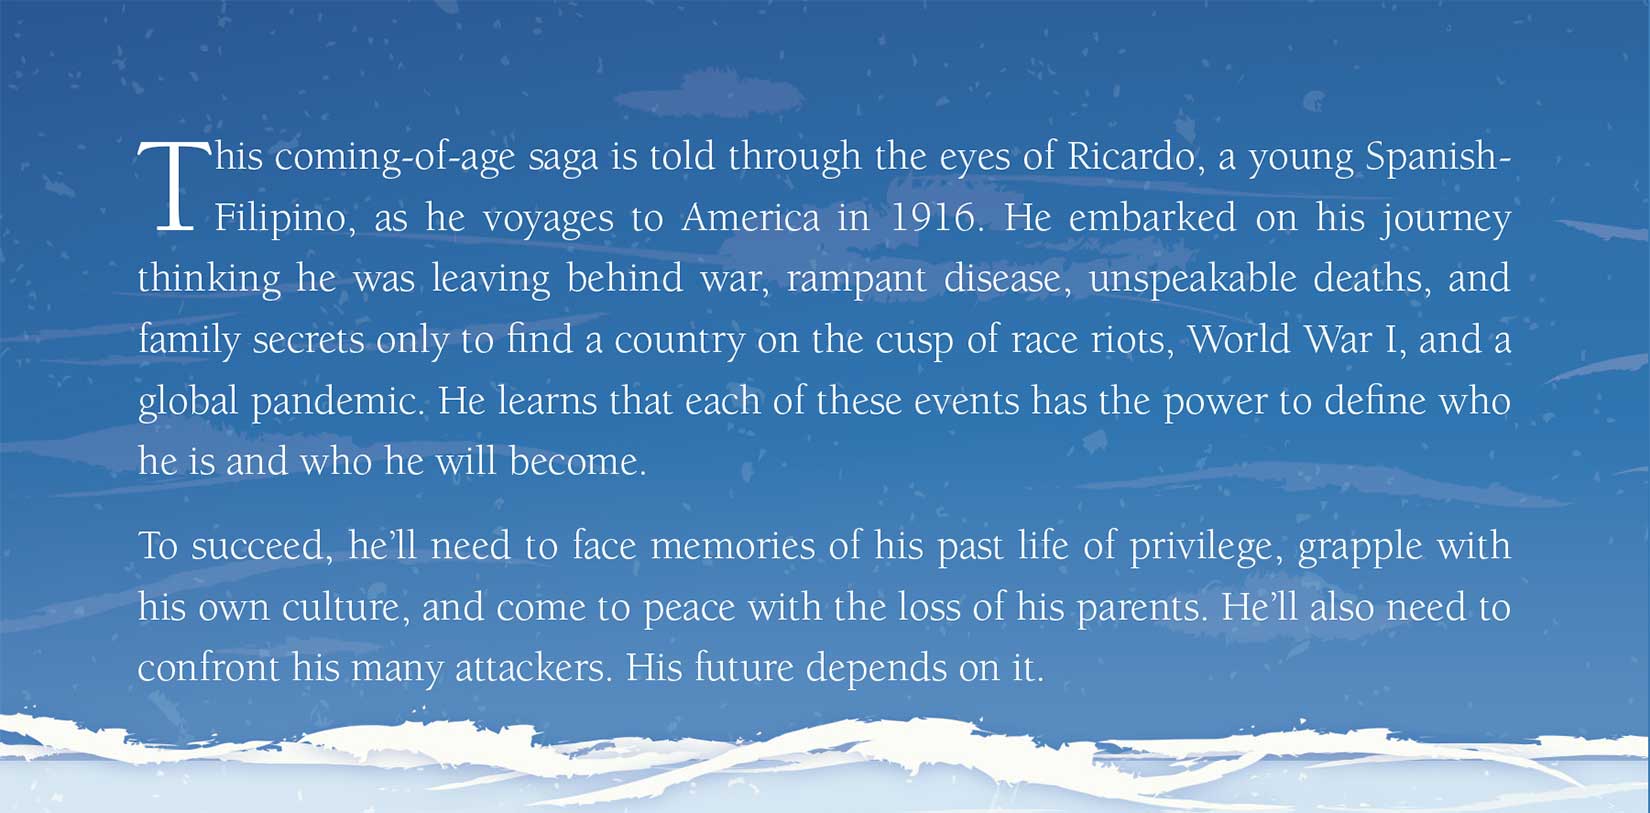 From the back cover: This coming-of-age saga is told through the eyes of Ricardo, a young Spanish-Filipino, as he voyages to America in 1916. He embarked on his journey thinking he was leaving behind war, rampant disease, unspeakable deaths, and family secrets only to find a country on the cusp of race riots, World War I, and a global pandemic. He learns that each of these events has the power to define who he is and who he will become. To succeed, he'll need to face memories of his past life of privilege, grapple with his own culture, and come to peace with the loss of his parents. He'll also need to confront his many attackers. His future depends on it.